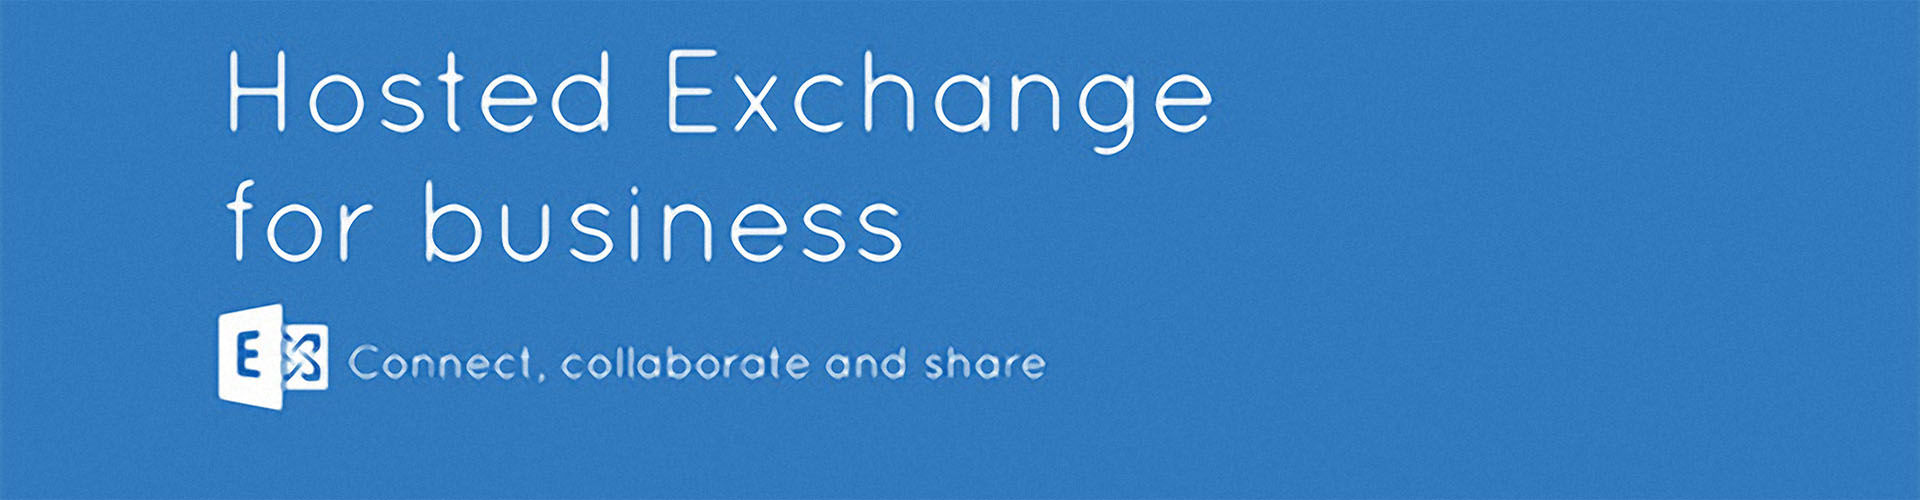 montreal microsoft hosted exchange 2016